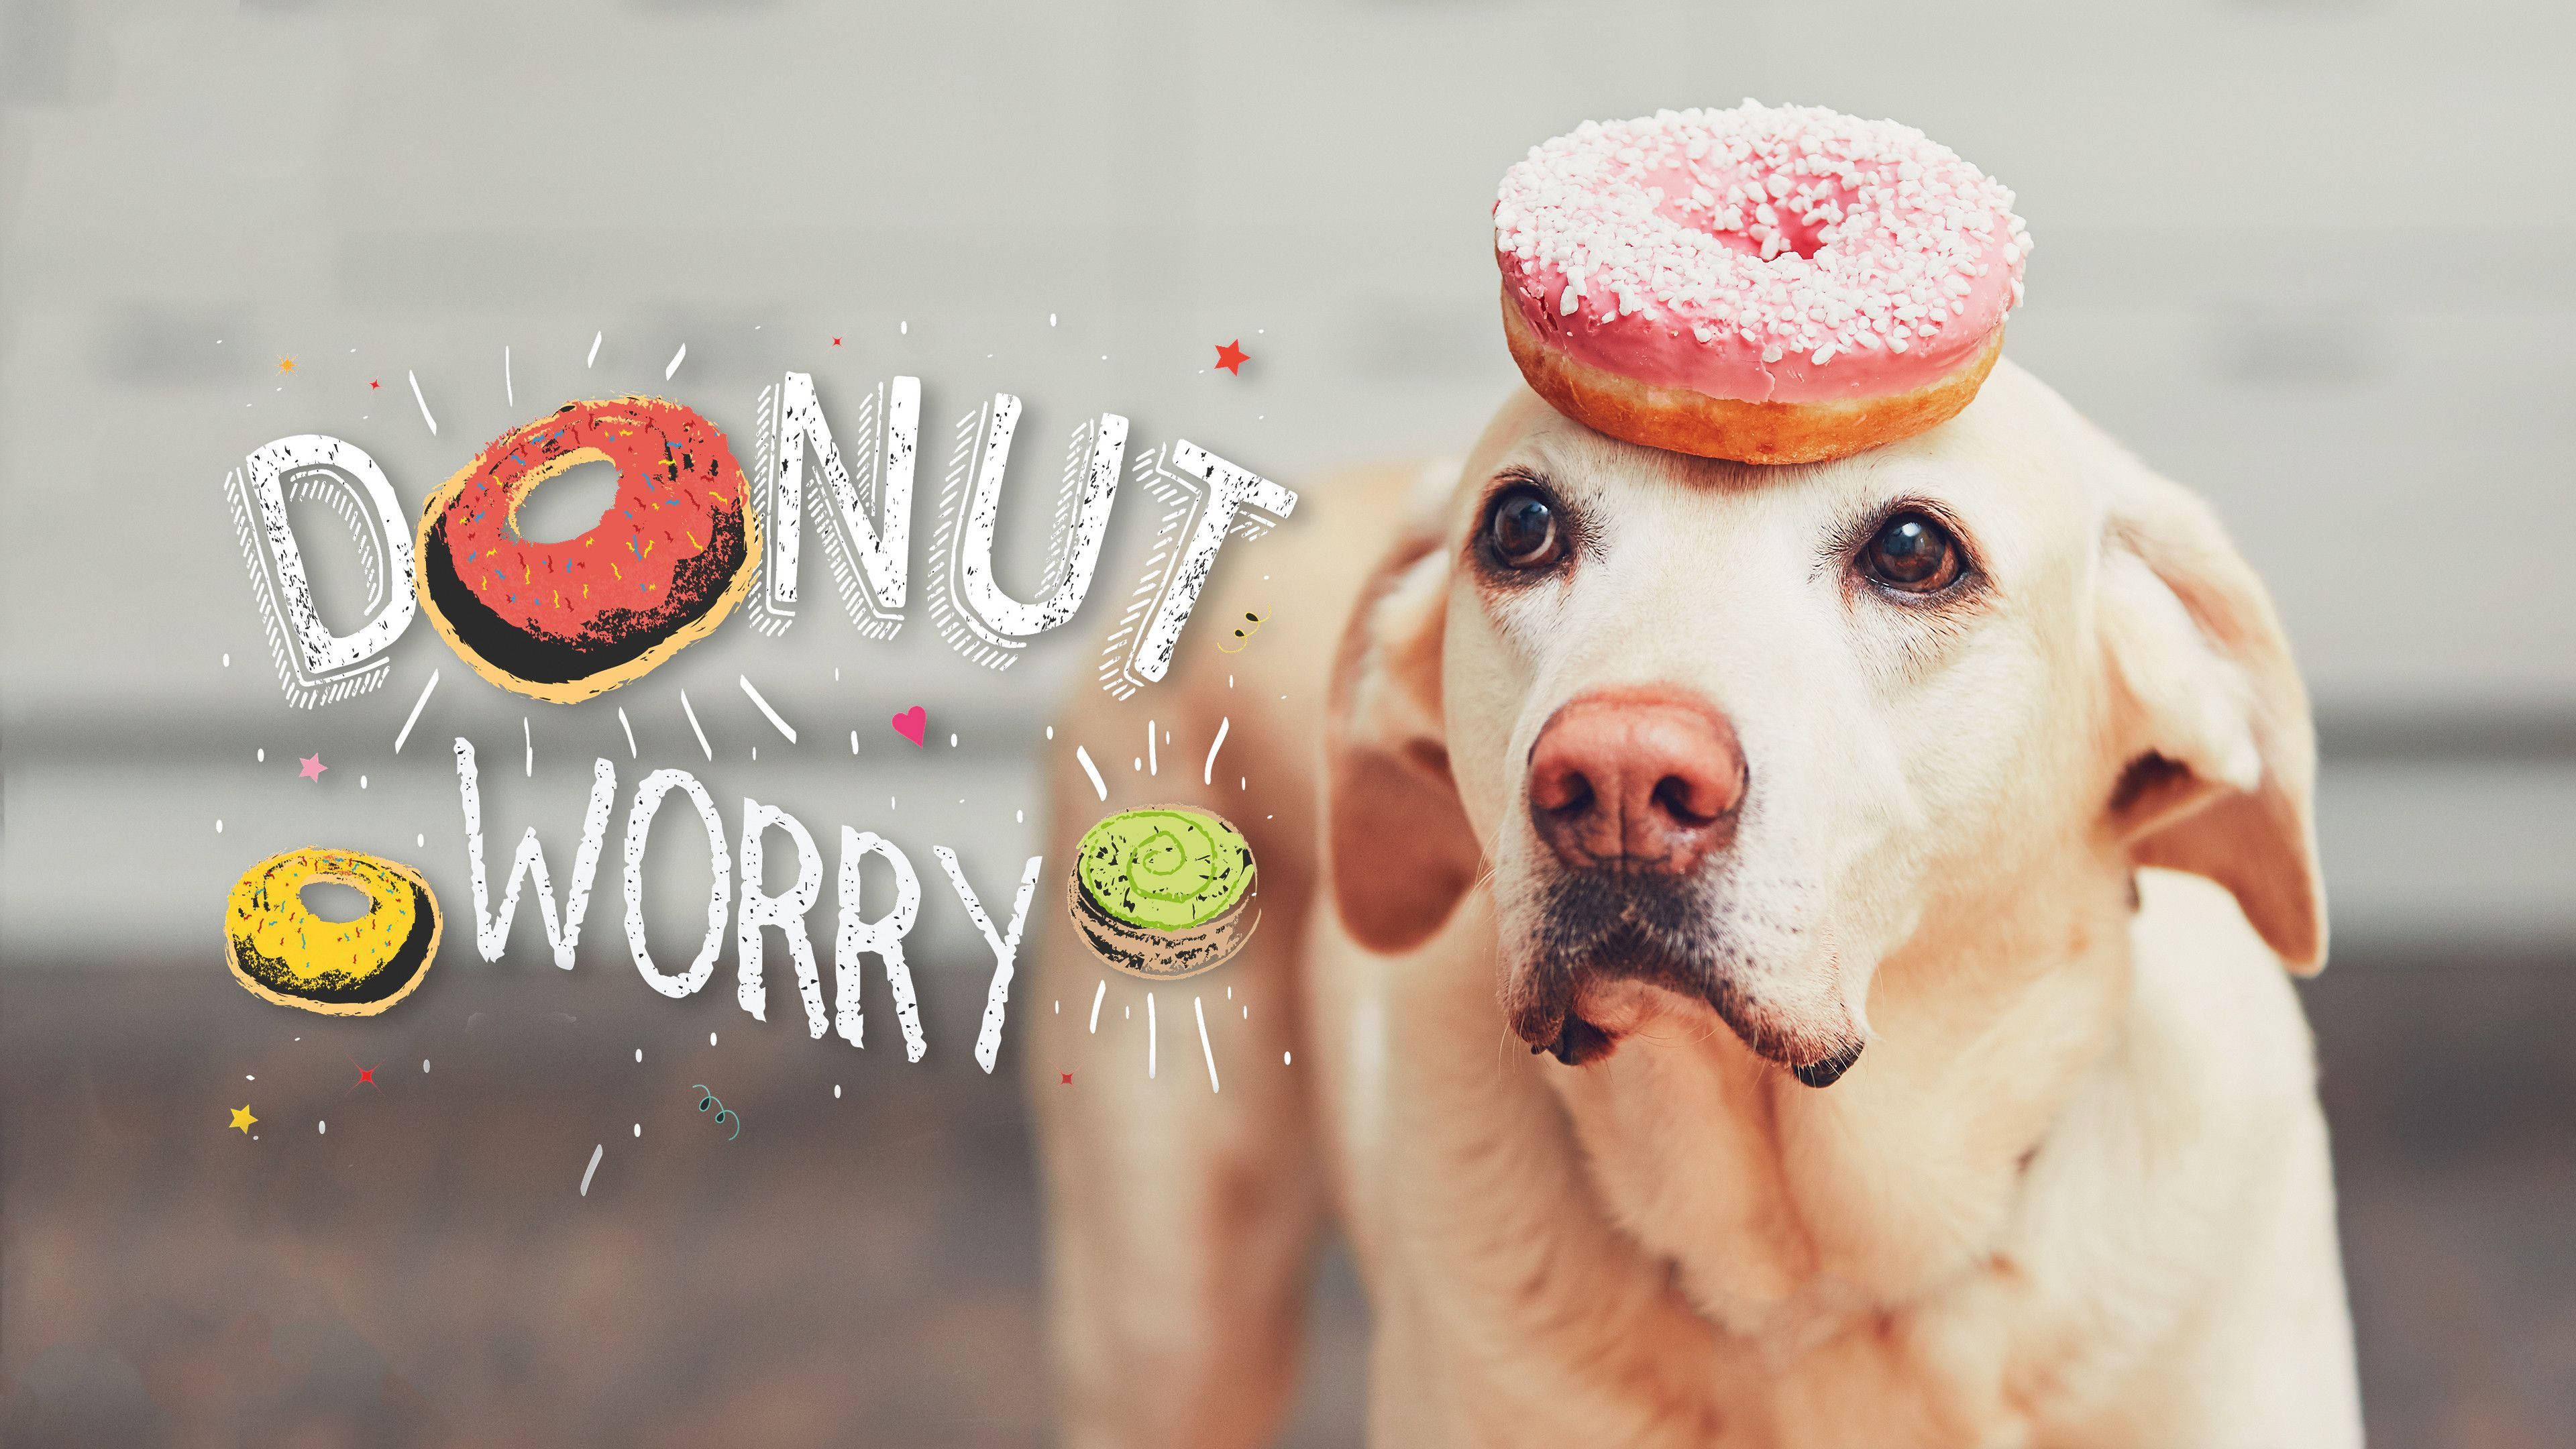 Download Indie Aesthetic Laptop Donut On Dog Wallpaper